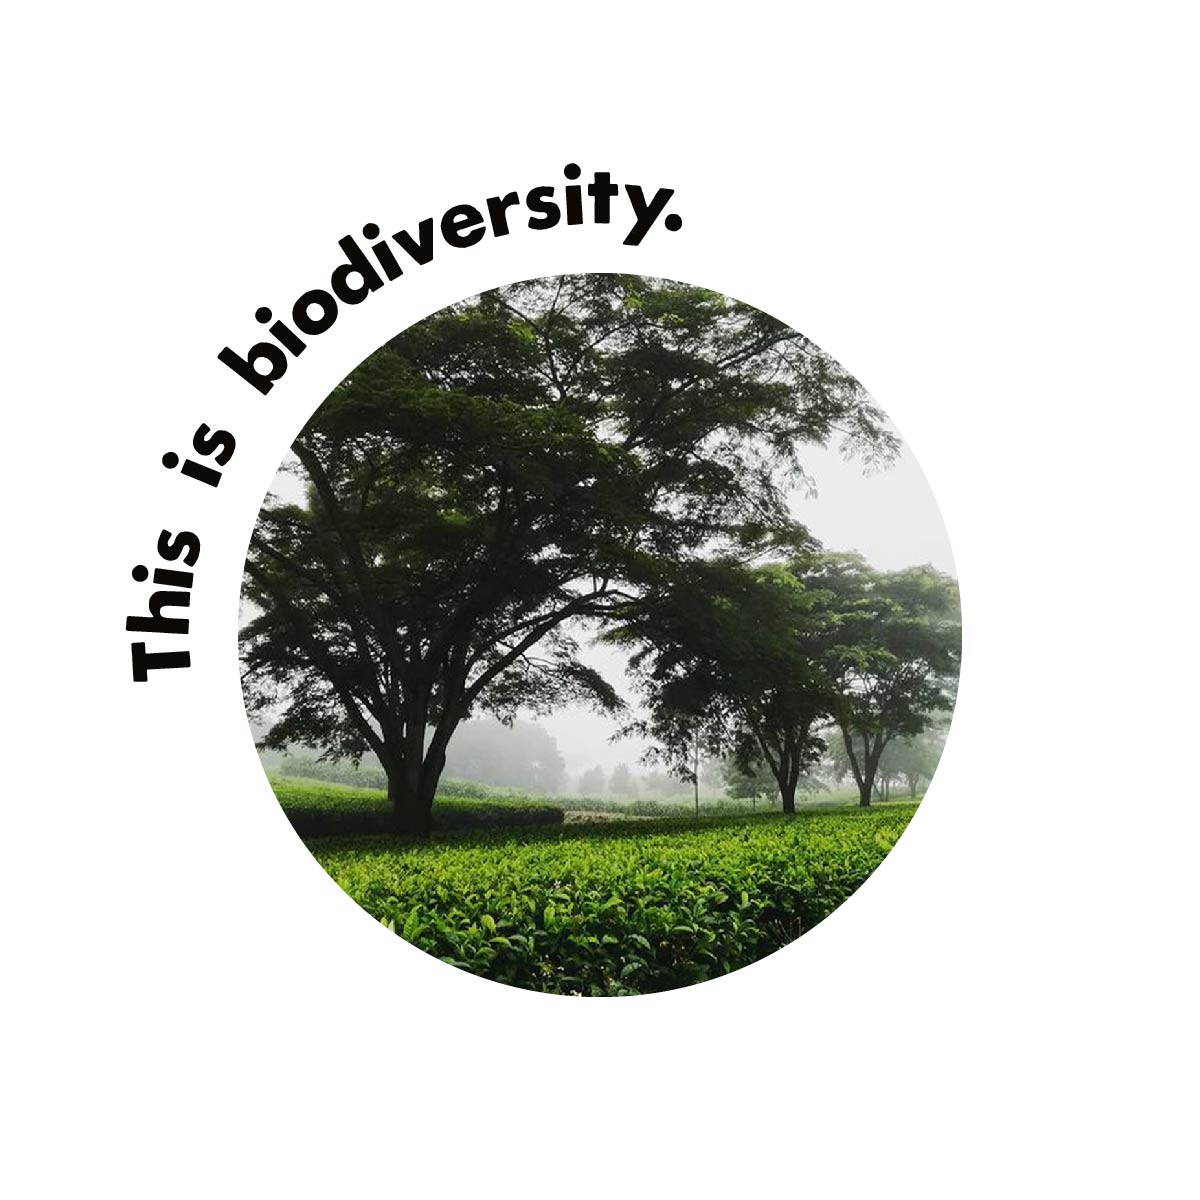 This is Biodiversity with Tree